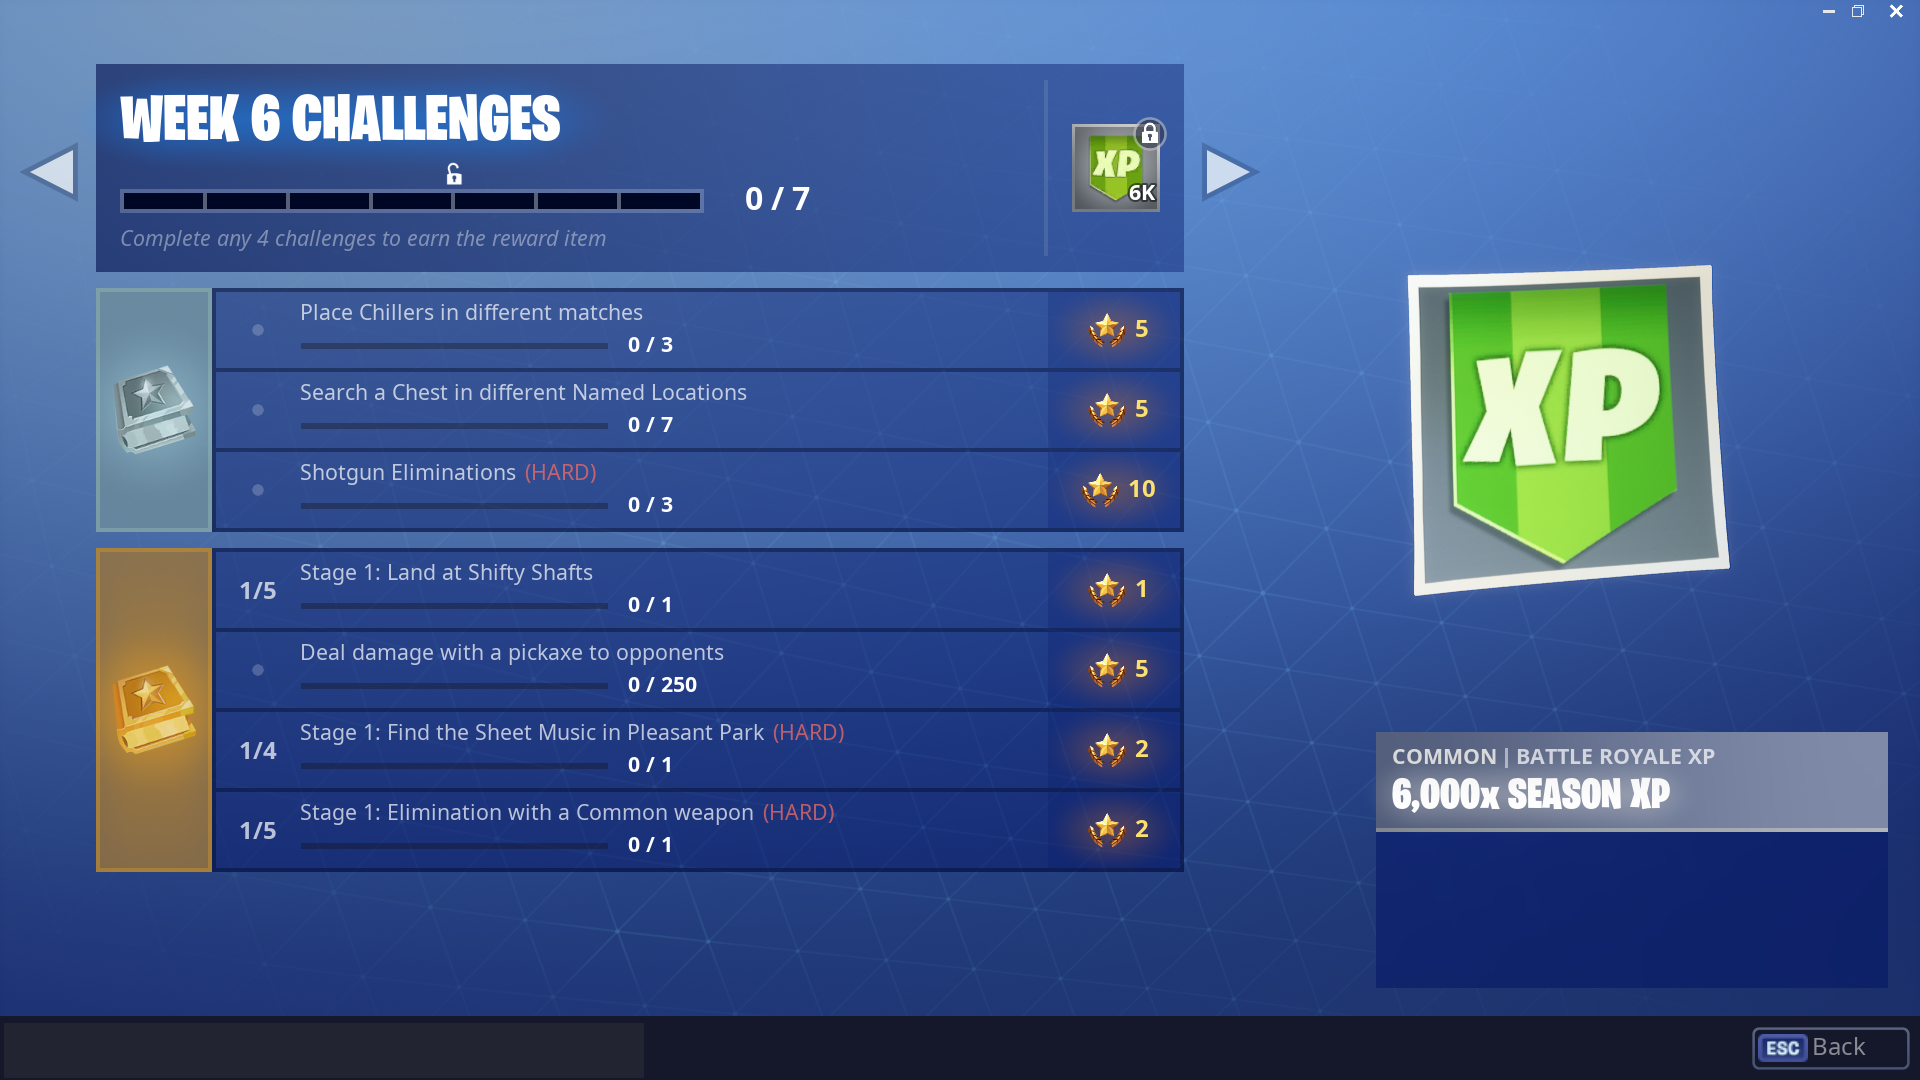 battle pass challenges for week 6 season 6 of fortnite battle royale with solutions fortnite news and statistics ss1 - fortnite unvaulted options